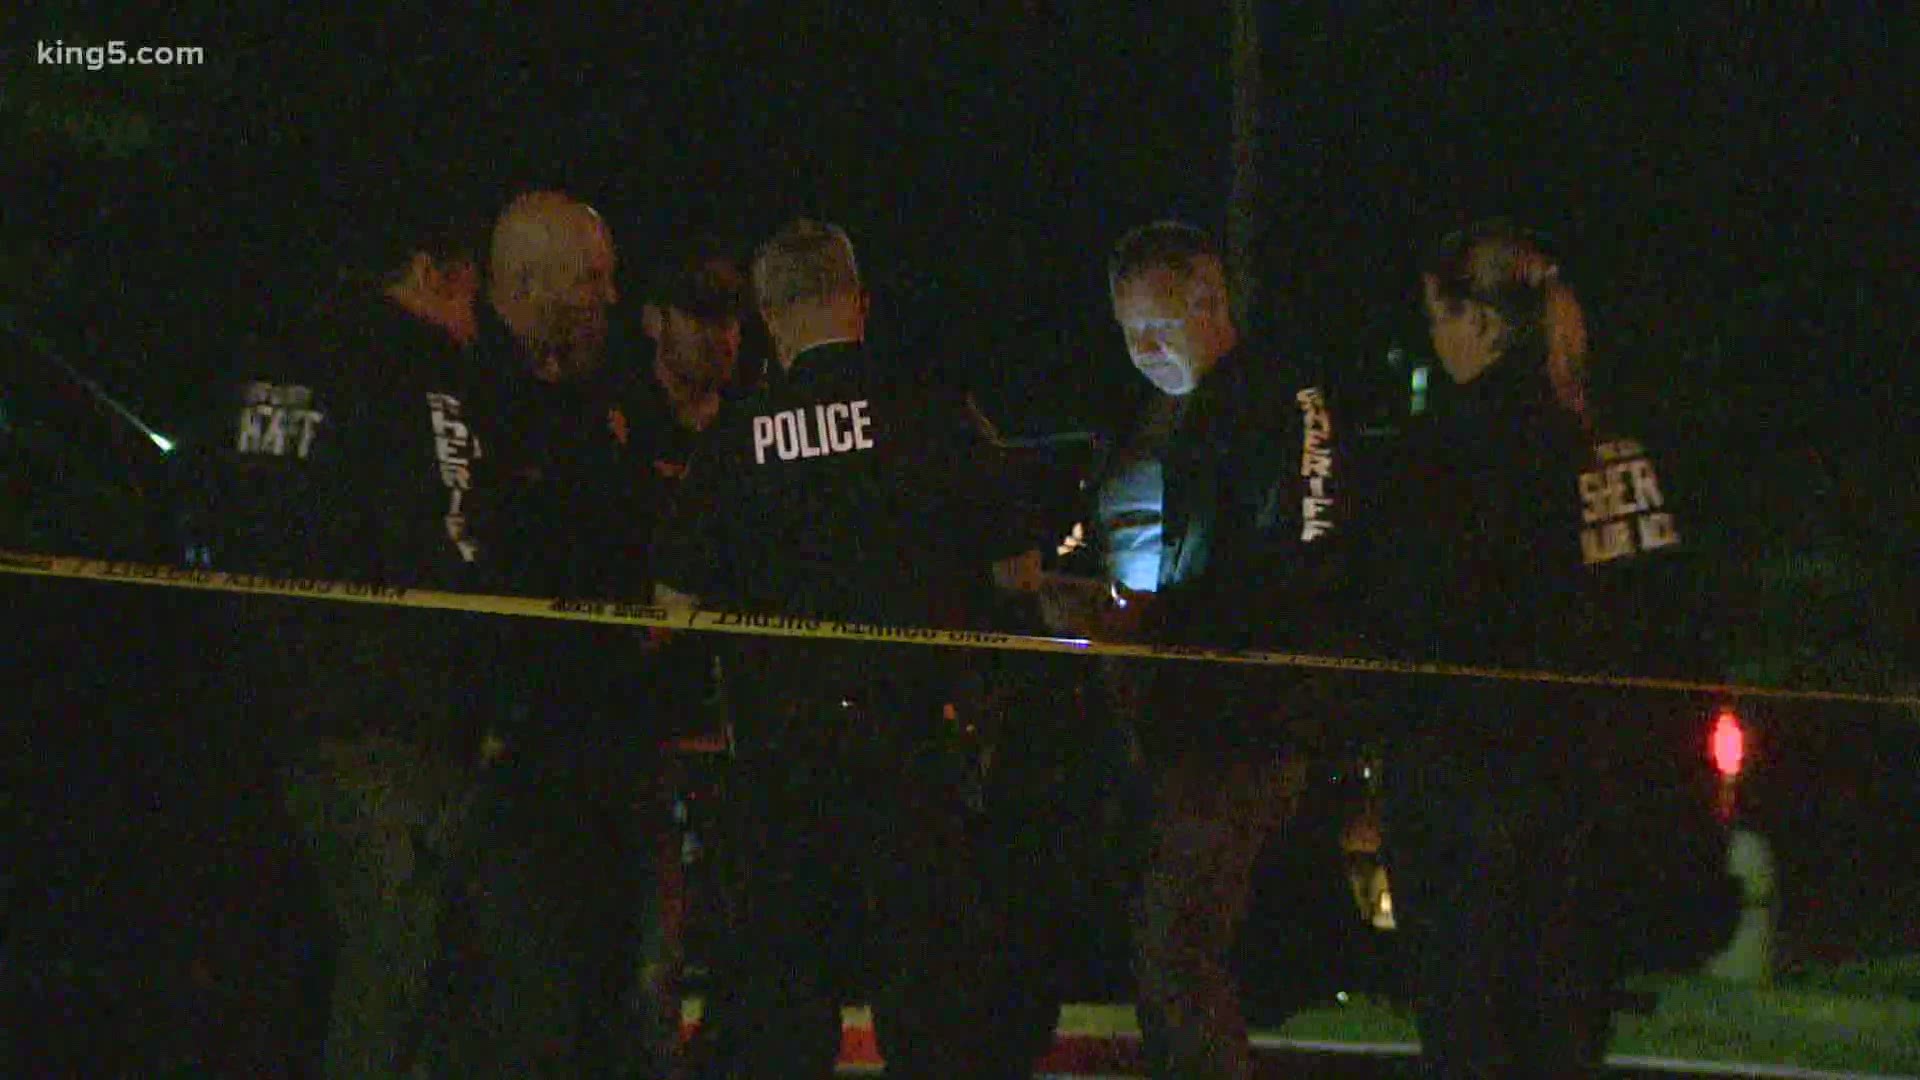 A 25-year-old man died after a shooting in Sammamish Wednesday evening.